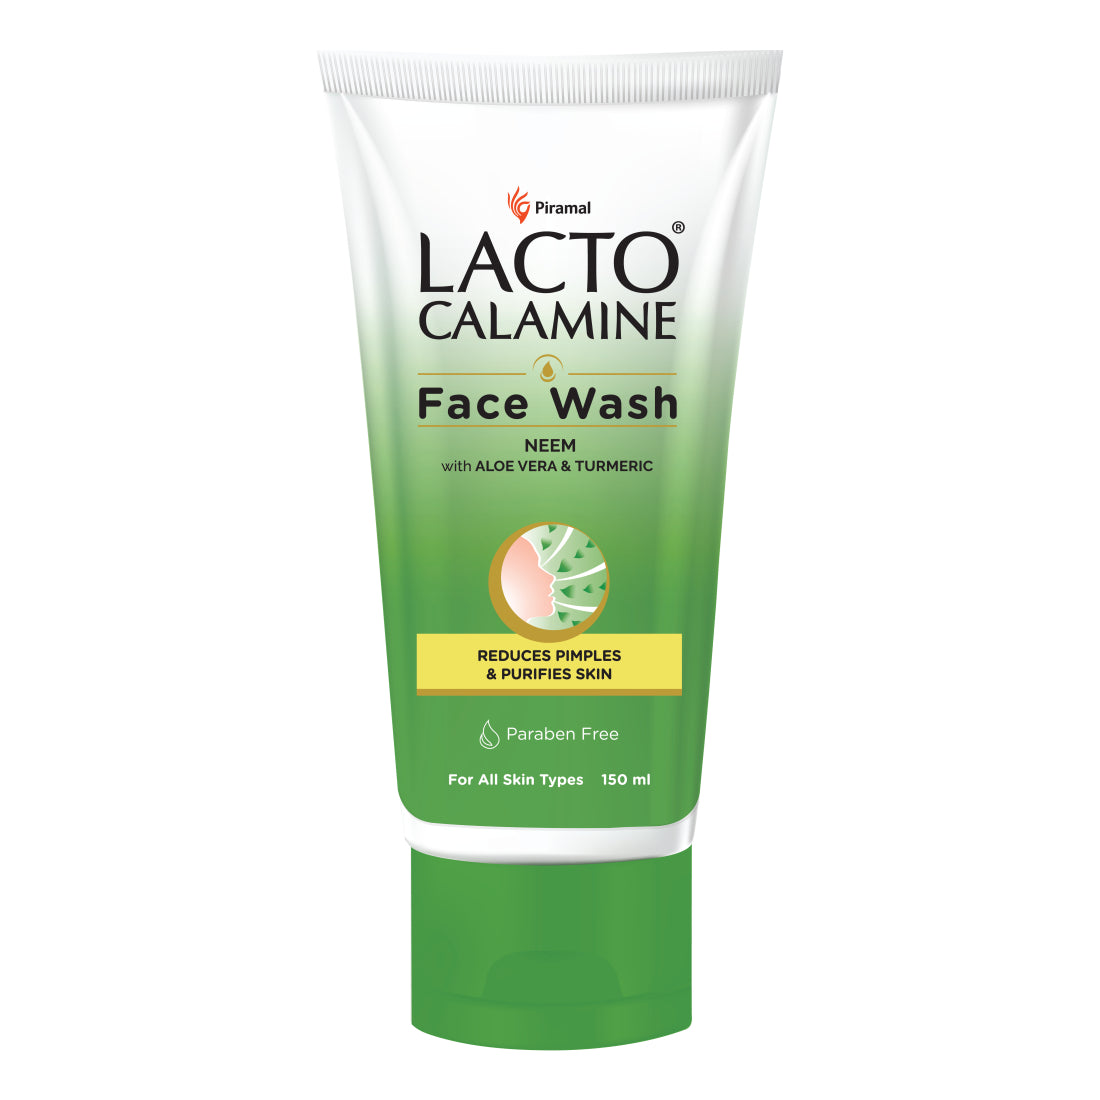 Lacto Calamine Neem Face Wash With Aloe Vera & Turmeric | 150ml | Niacinamide & Salicylic Acid Face Wash | Facewash Reduces Pimples, Purifies Skin & Oil Control | For All Skin Types